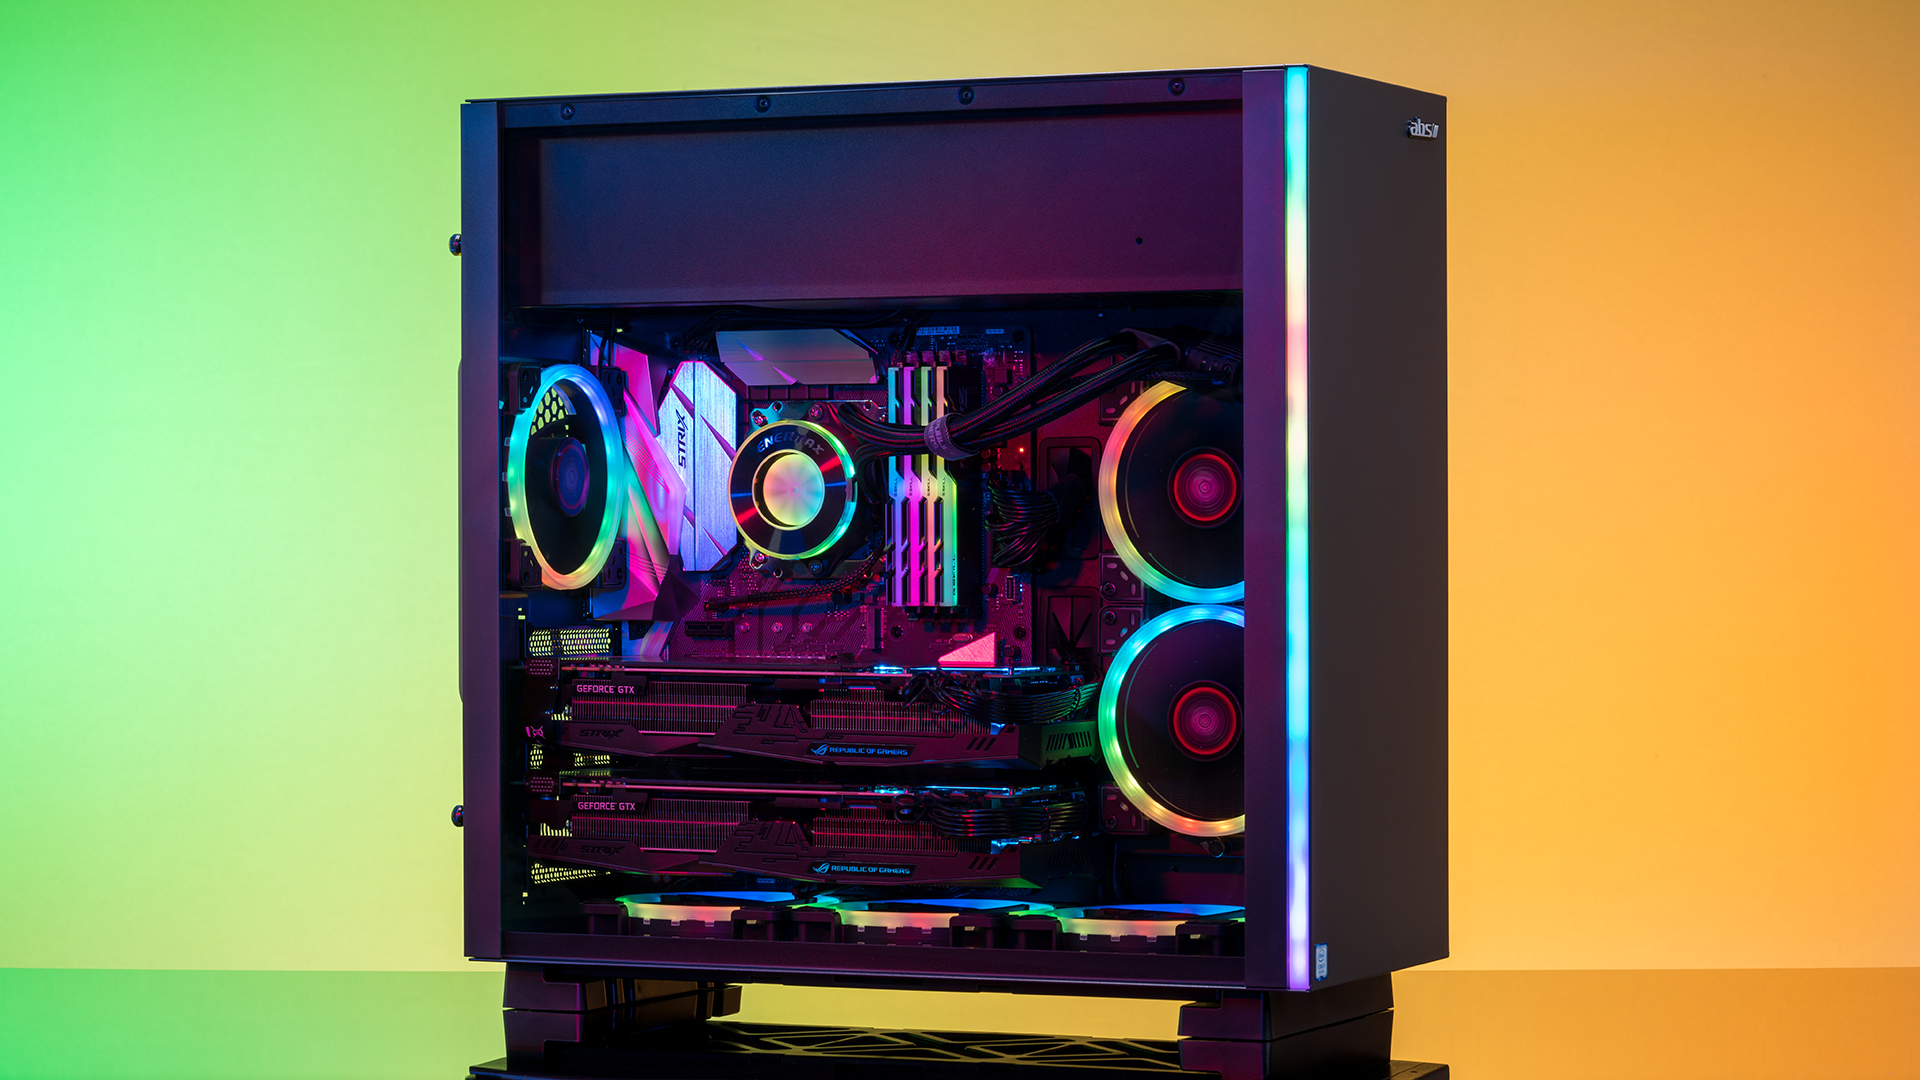 Rosewill supplied some of their uniquely designed components, which ABS then paired with ultra-high performance gaming parts from across the industry. In my eyes, the end result is simply proof that these sister-companies should team-up more often.